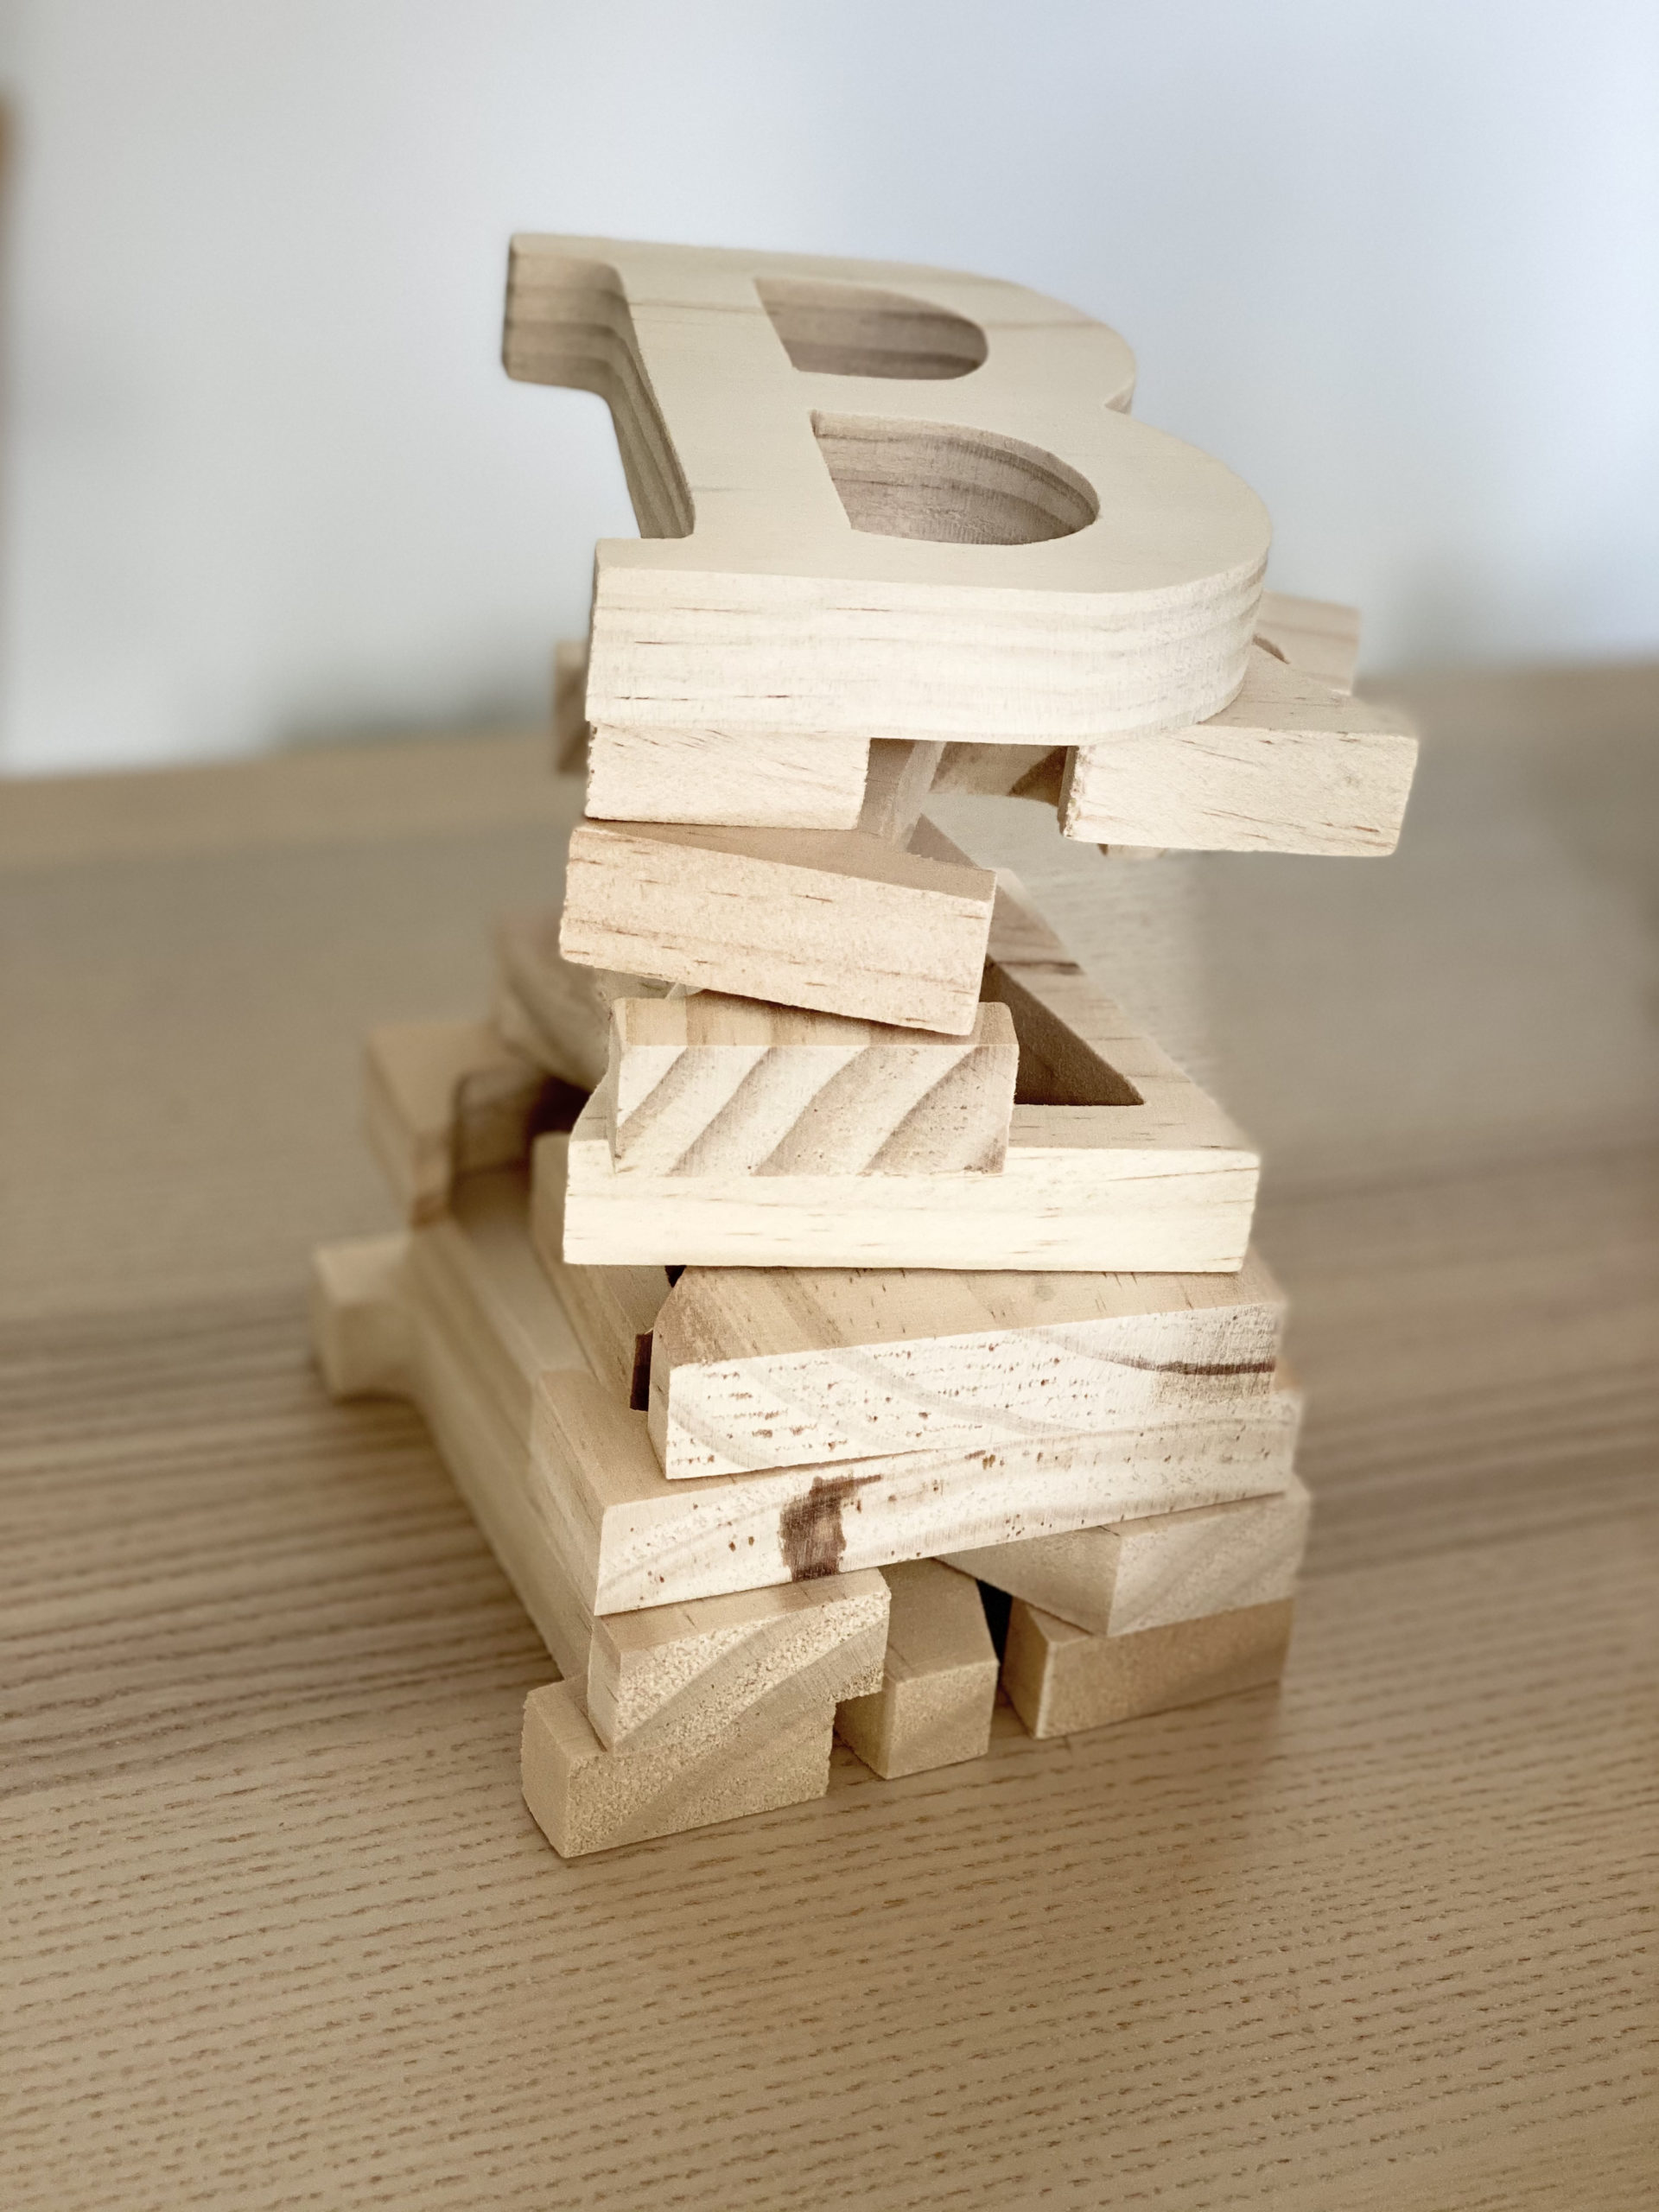 initial-frames-party-gifts-made-of-wood-letters